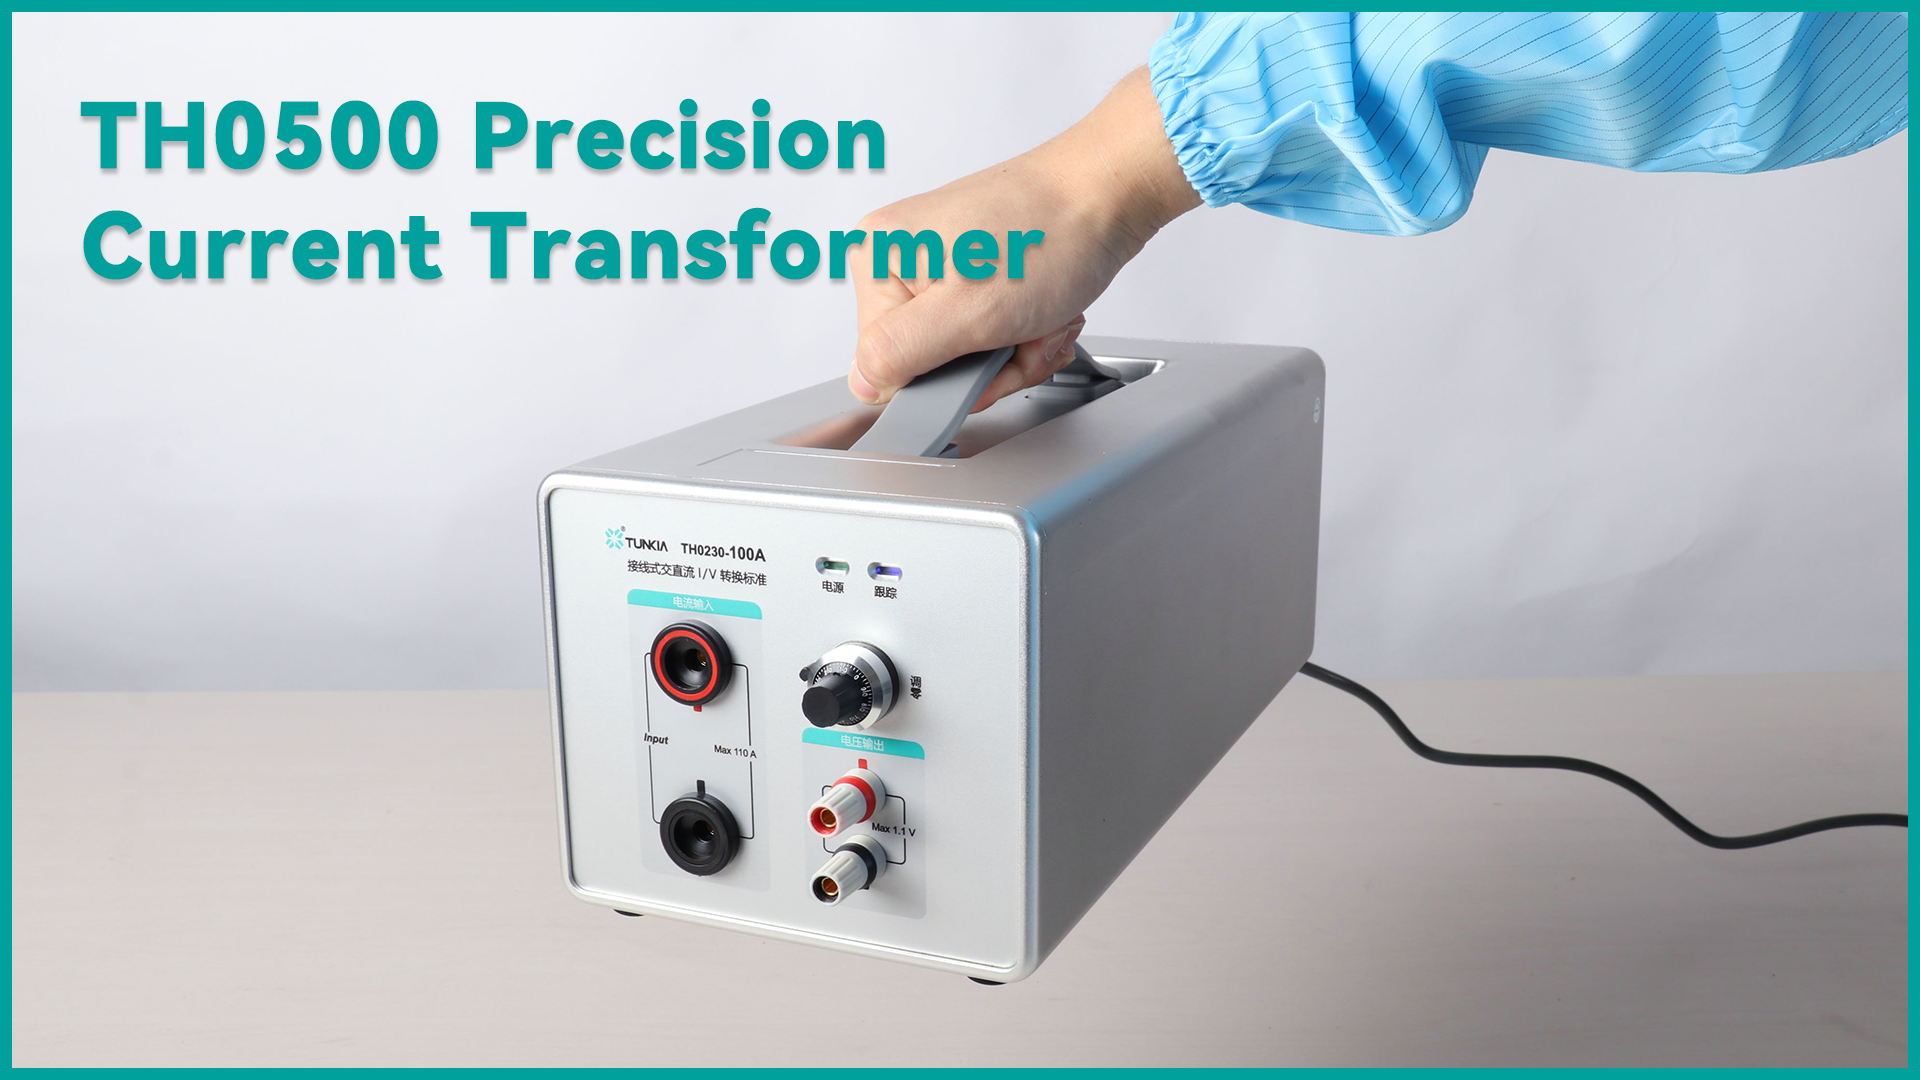 How to use a CT-TH0500 Precision Current Transformer